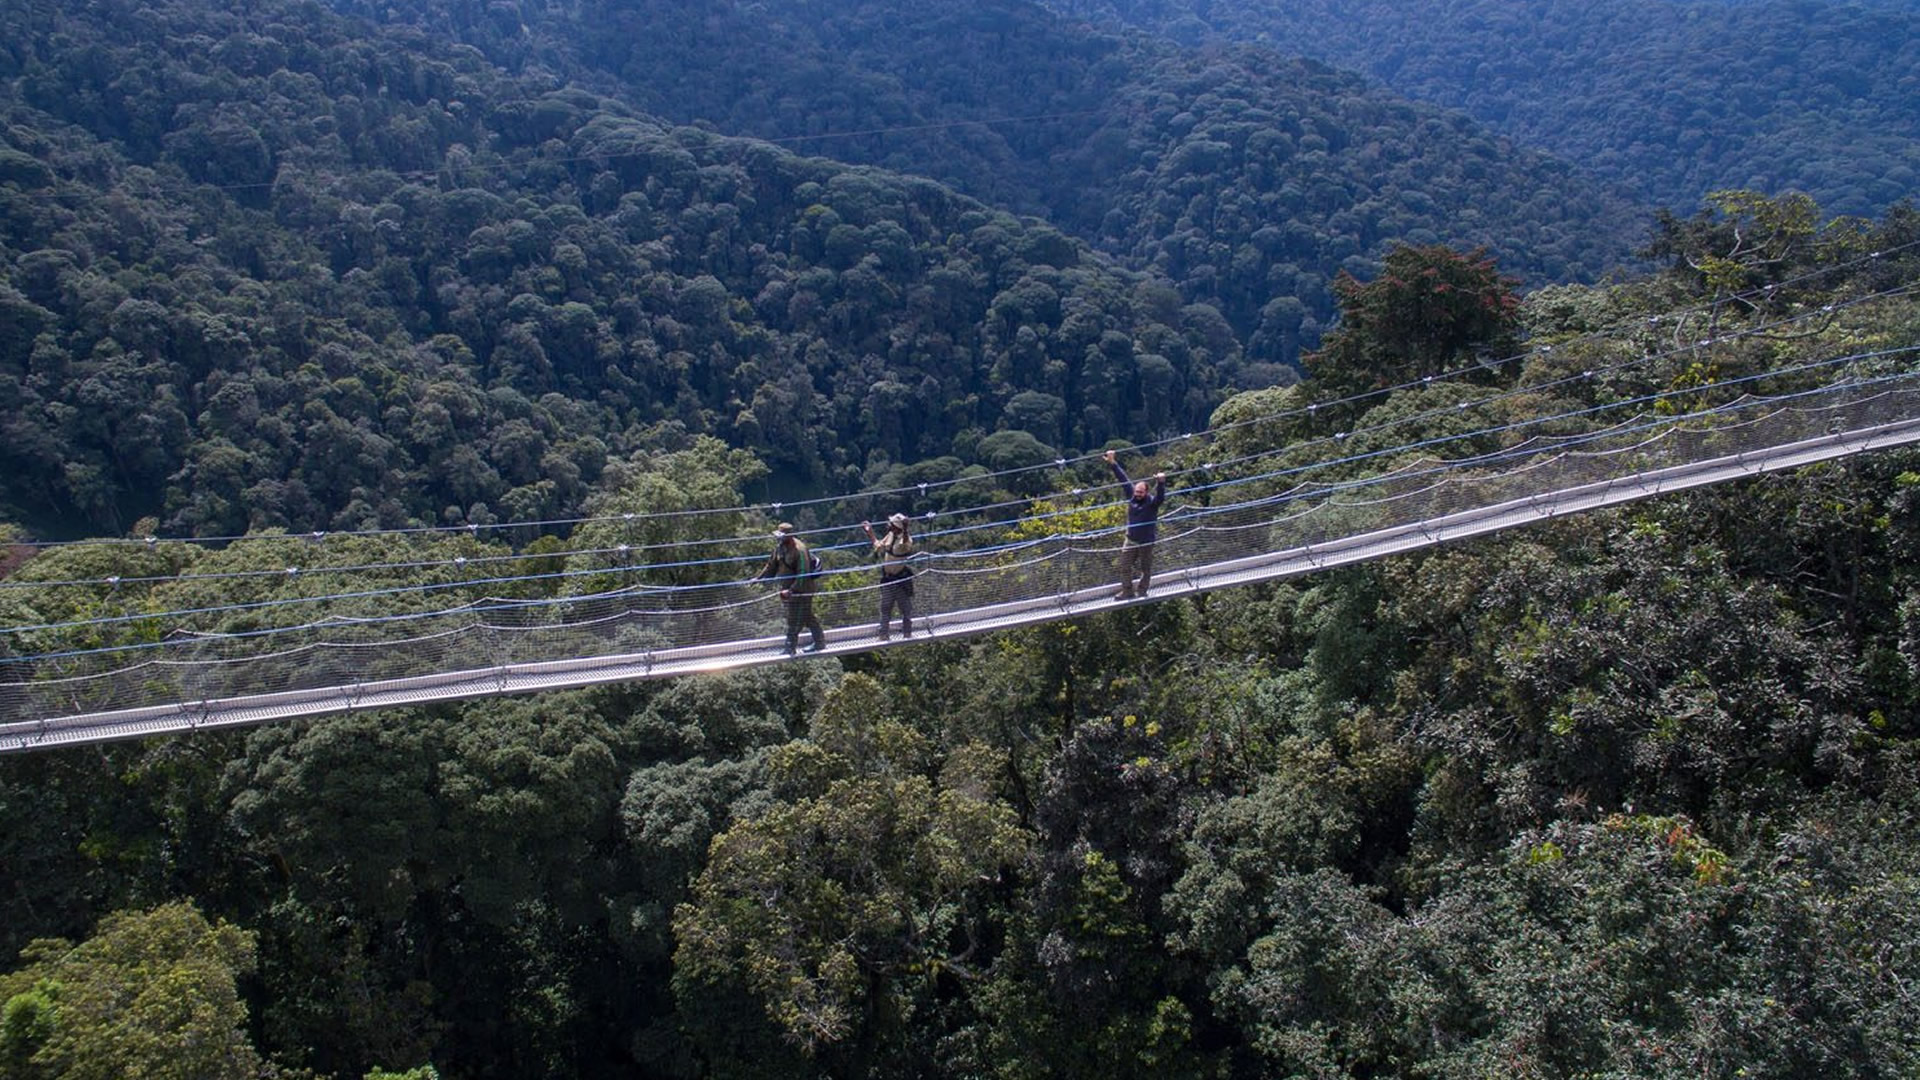 nyungwe forest national park